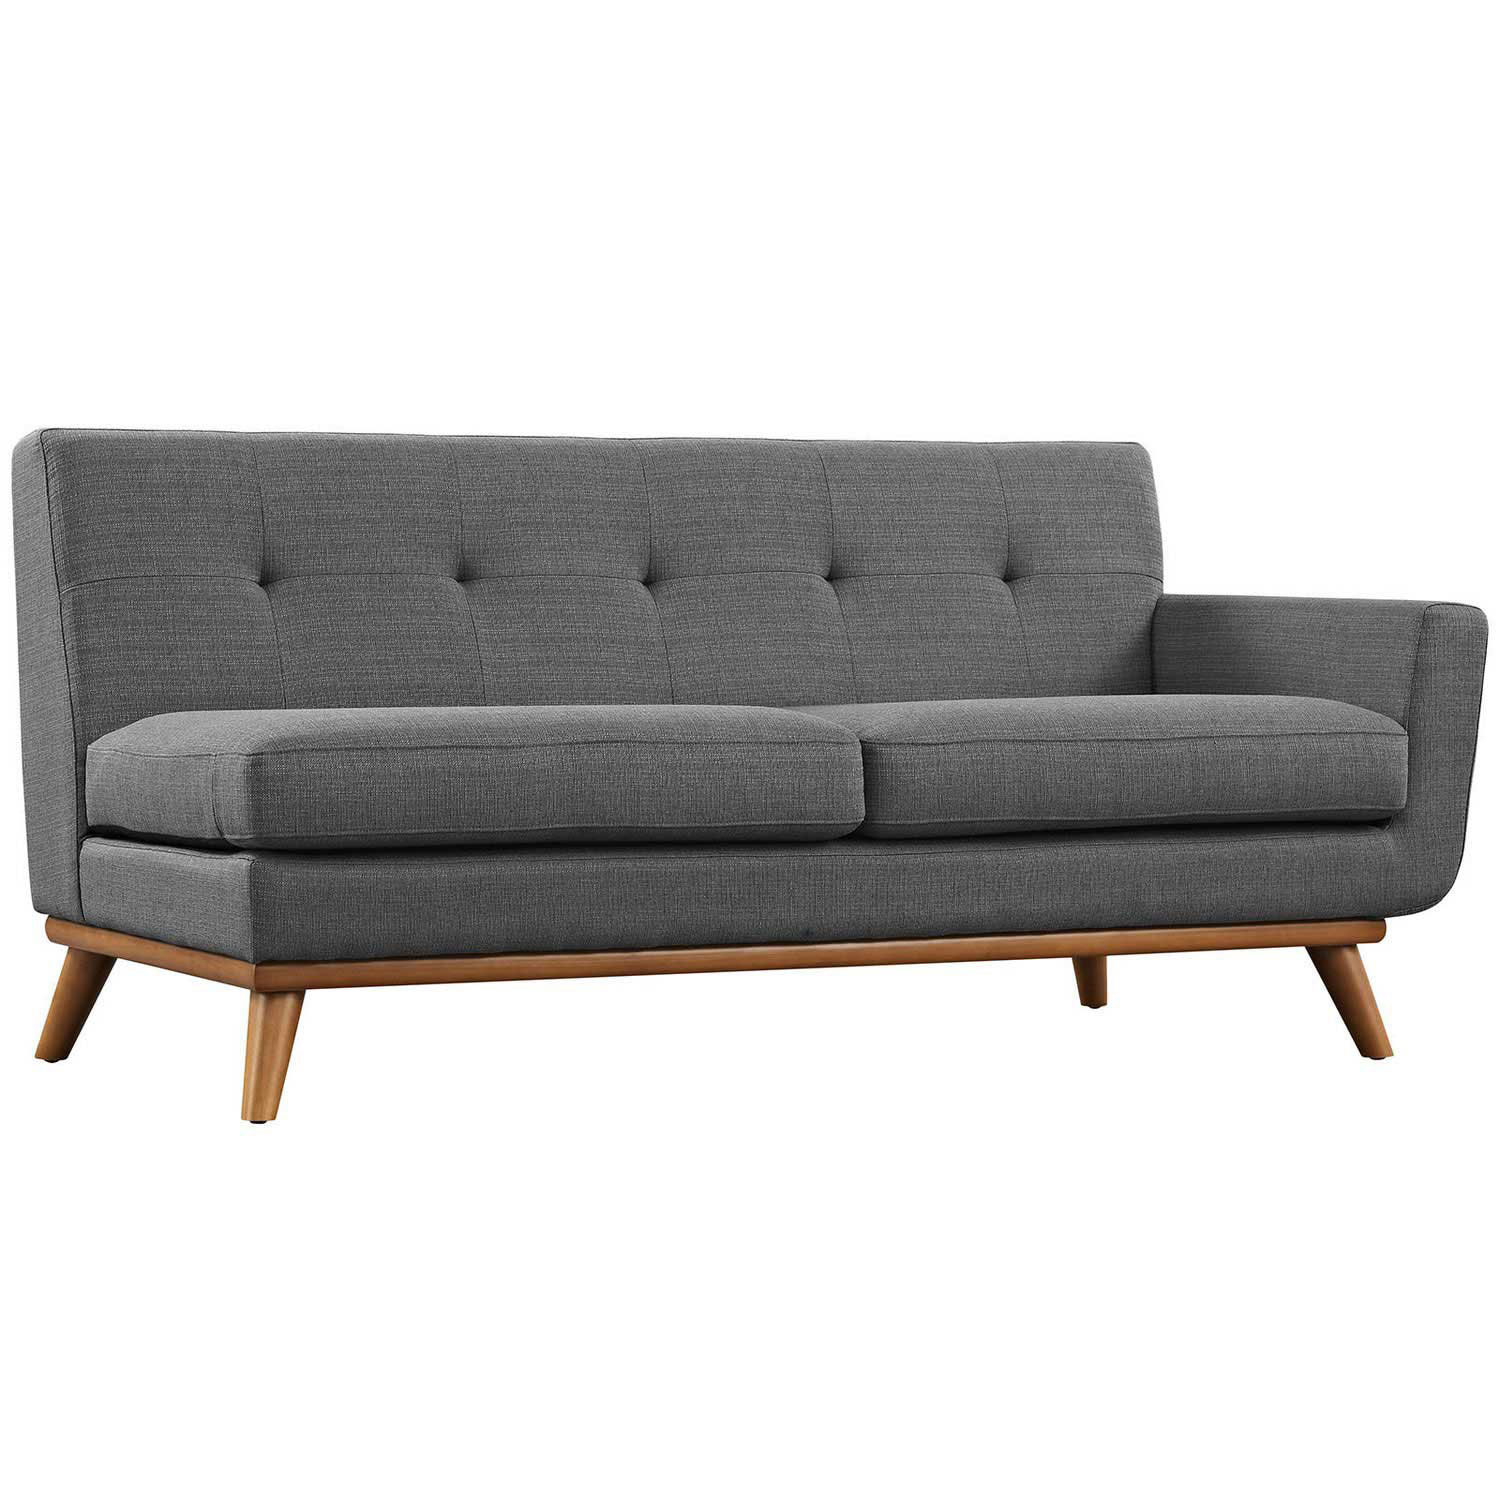 Modway Engage Right Arm Loveseat - Gray